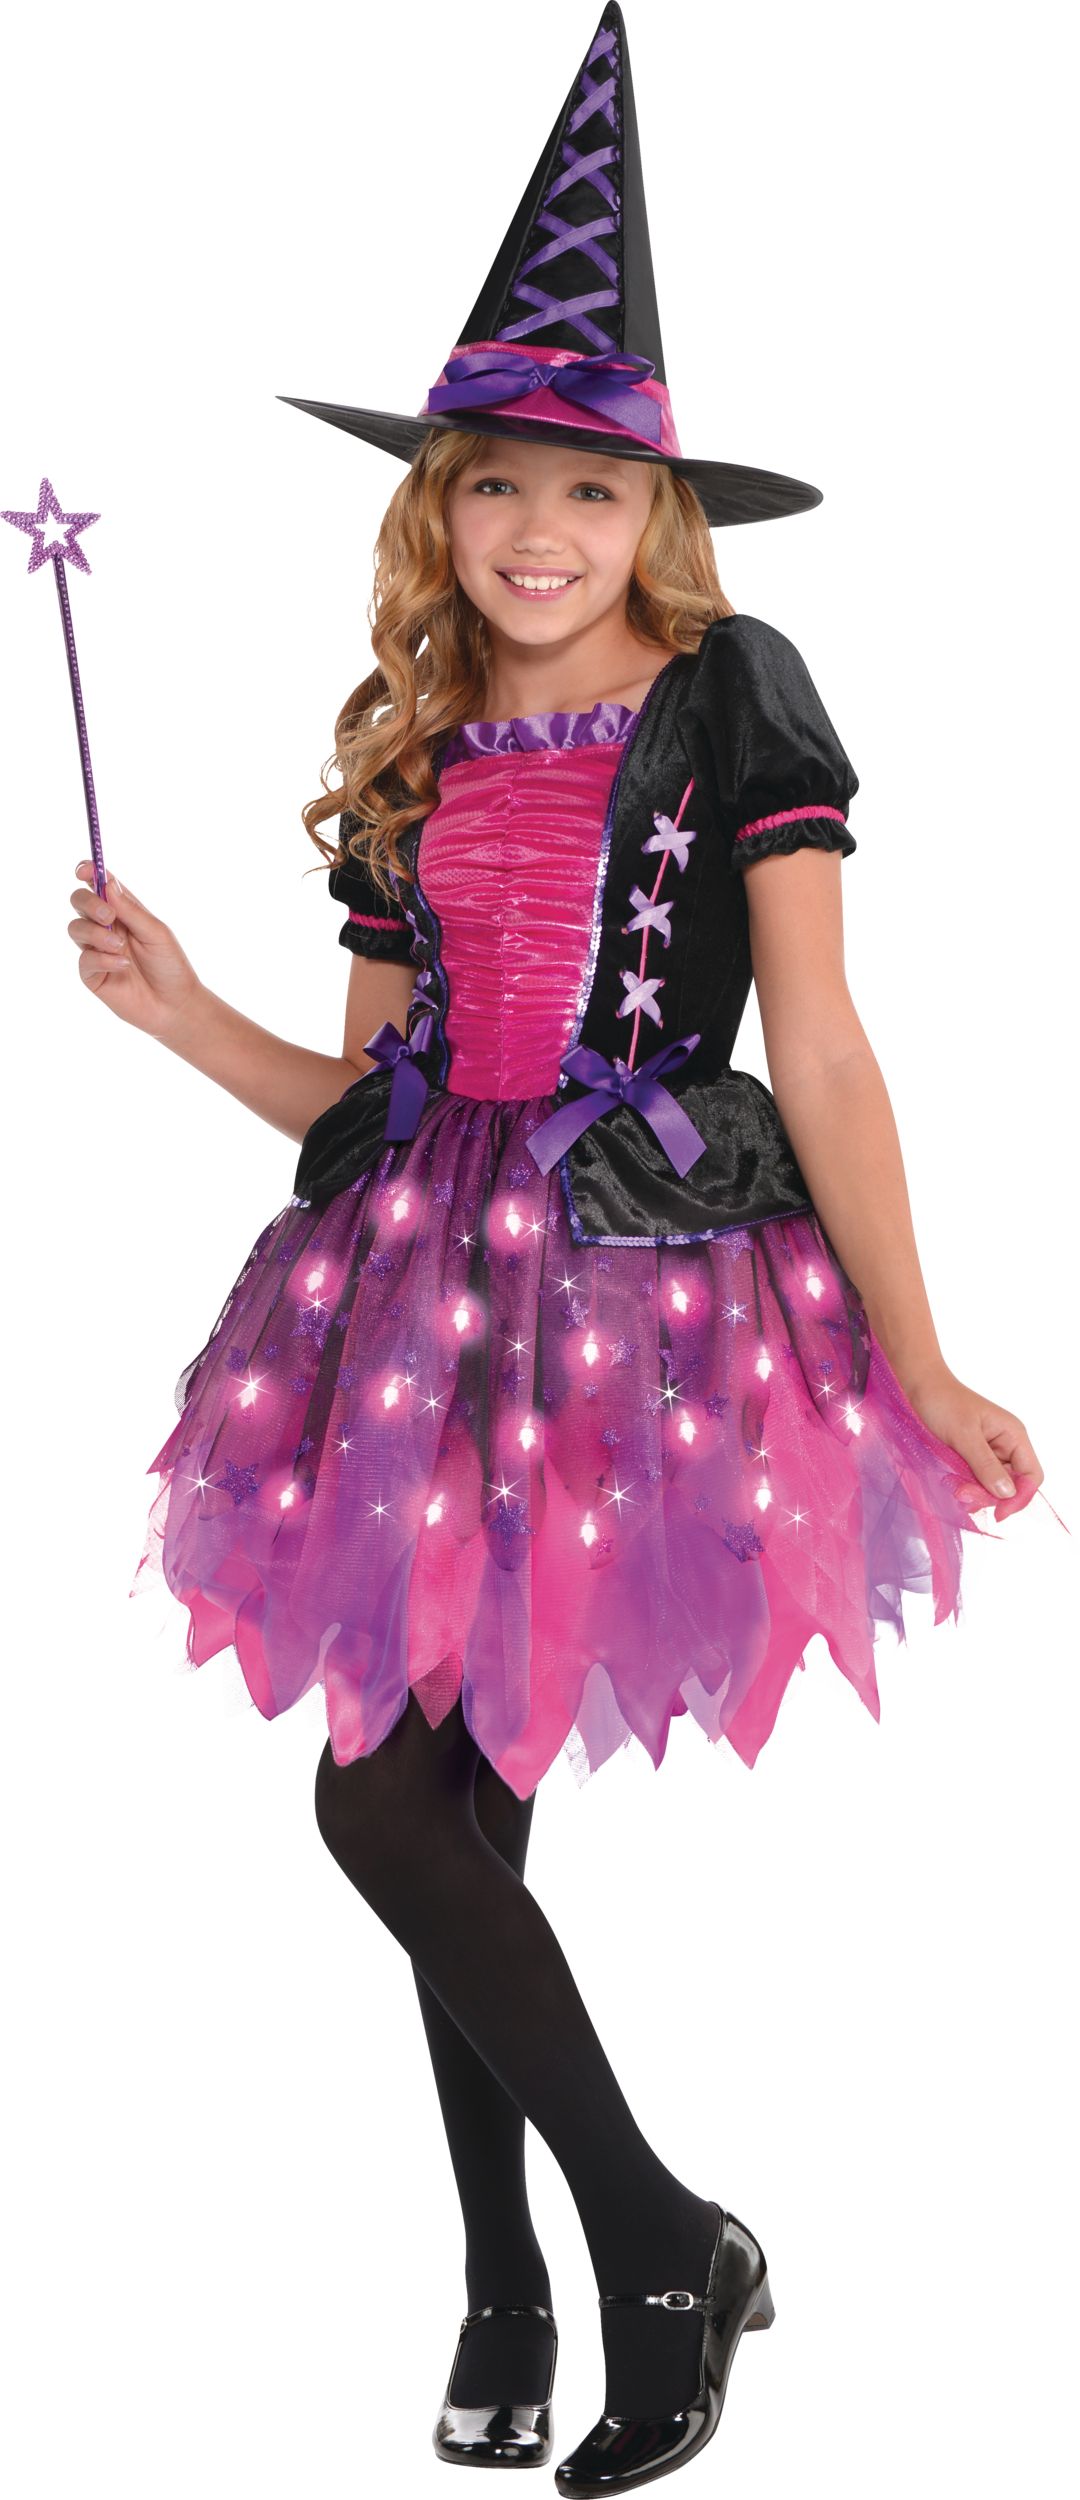 Disguise Play Time Girls Witch Costume + Hat - Purple/Pink/Black - Size S  (4-6X) 